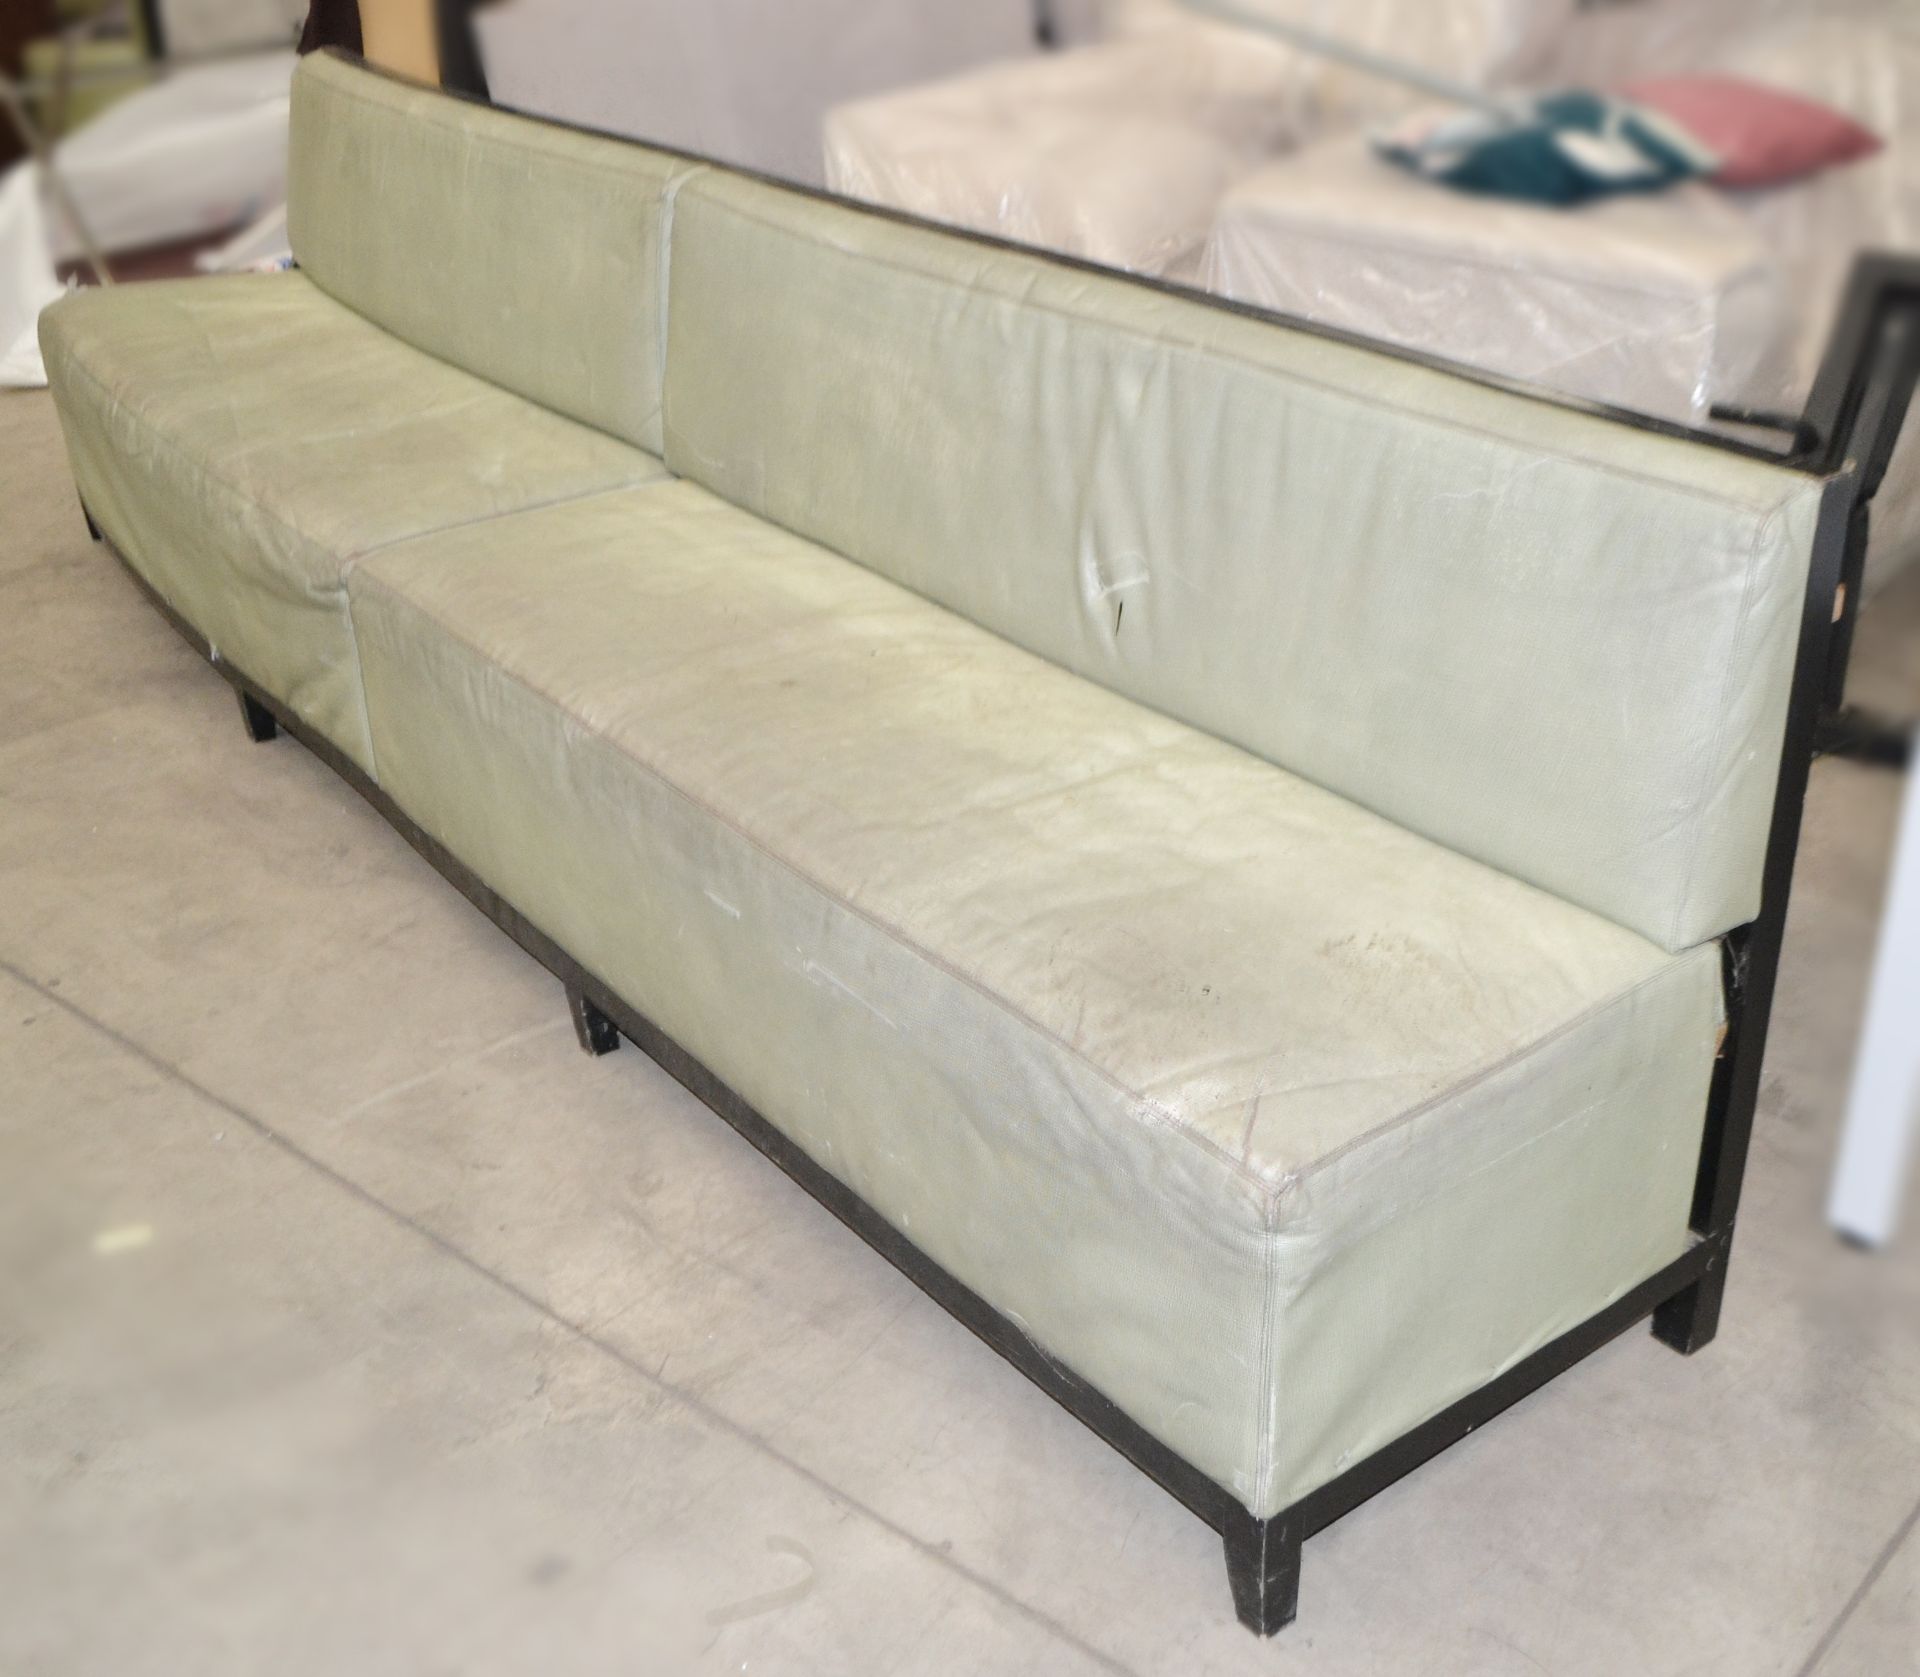 2 x Sections Of Curved Commercial Seating Upholstered In A Pale Green Faux Leather - Image 3 of 5